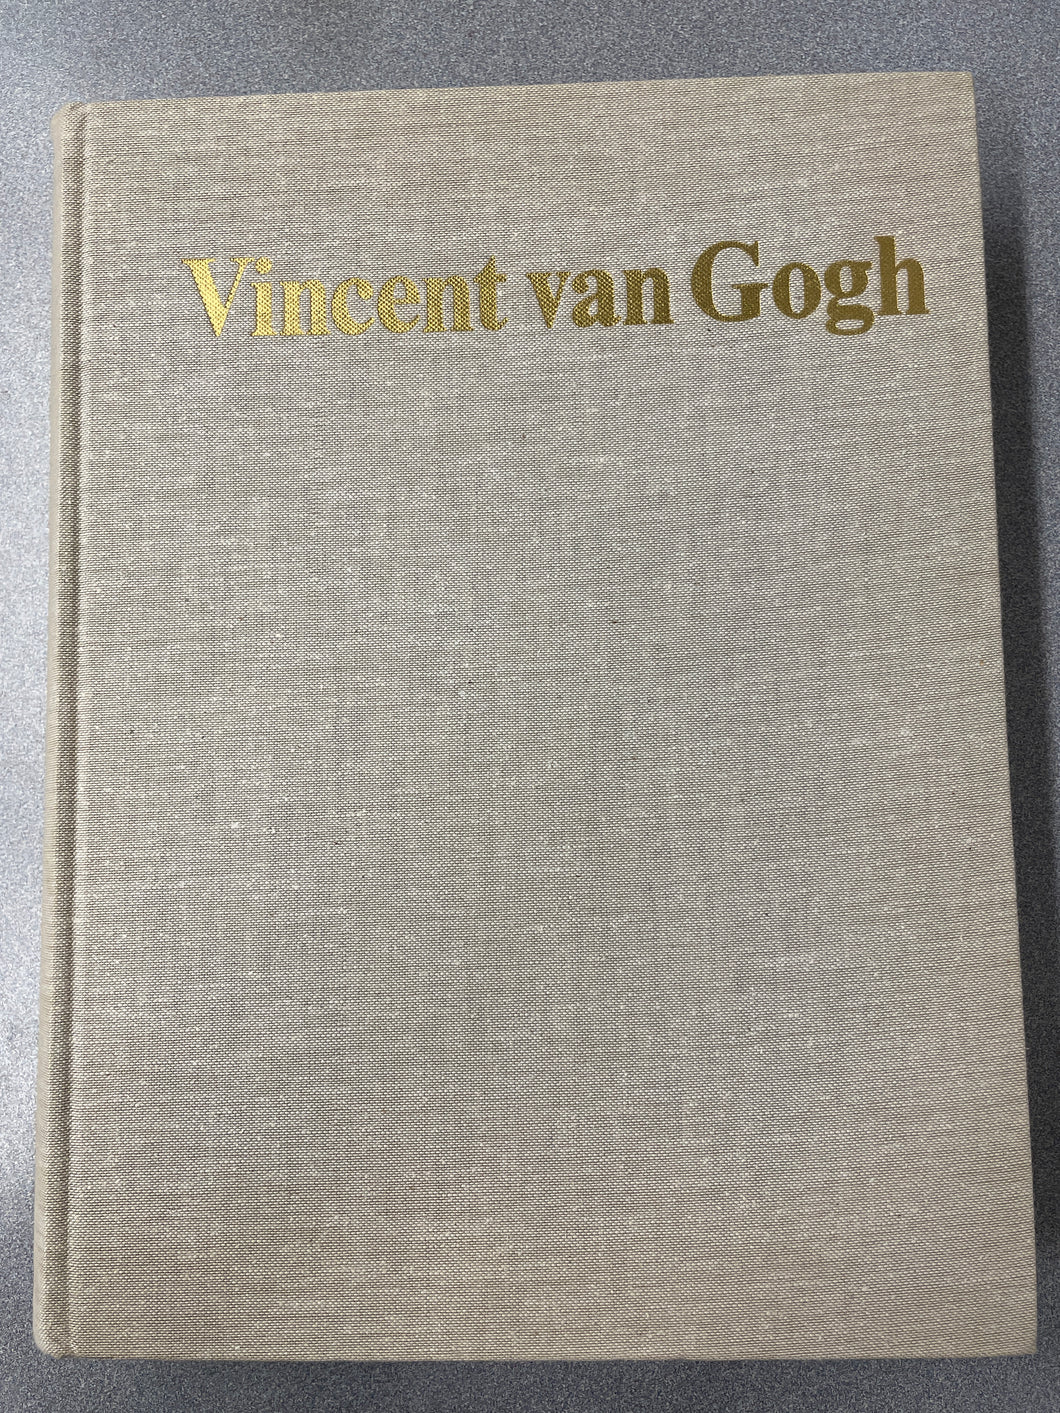 The Works of Vincent van Gogh: His Paintings and Drawings, de la Faille, J.-B. [1970] A 3/24